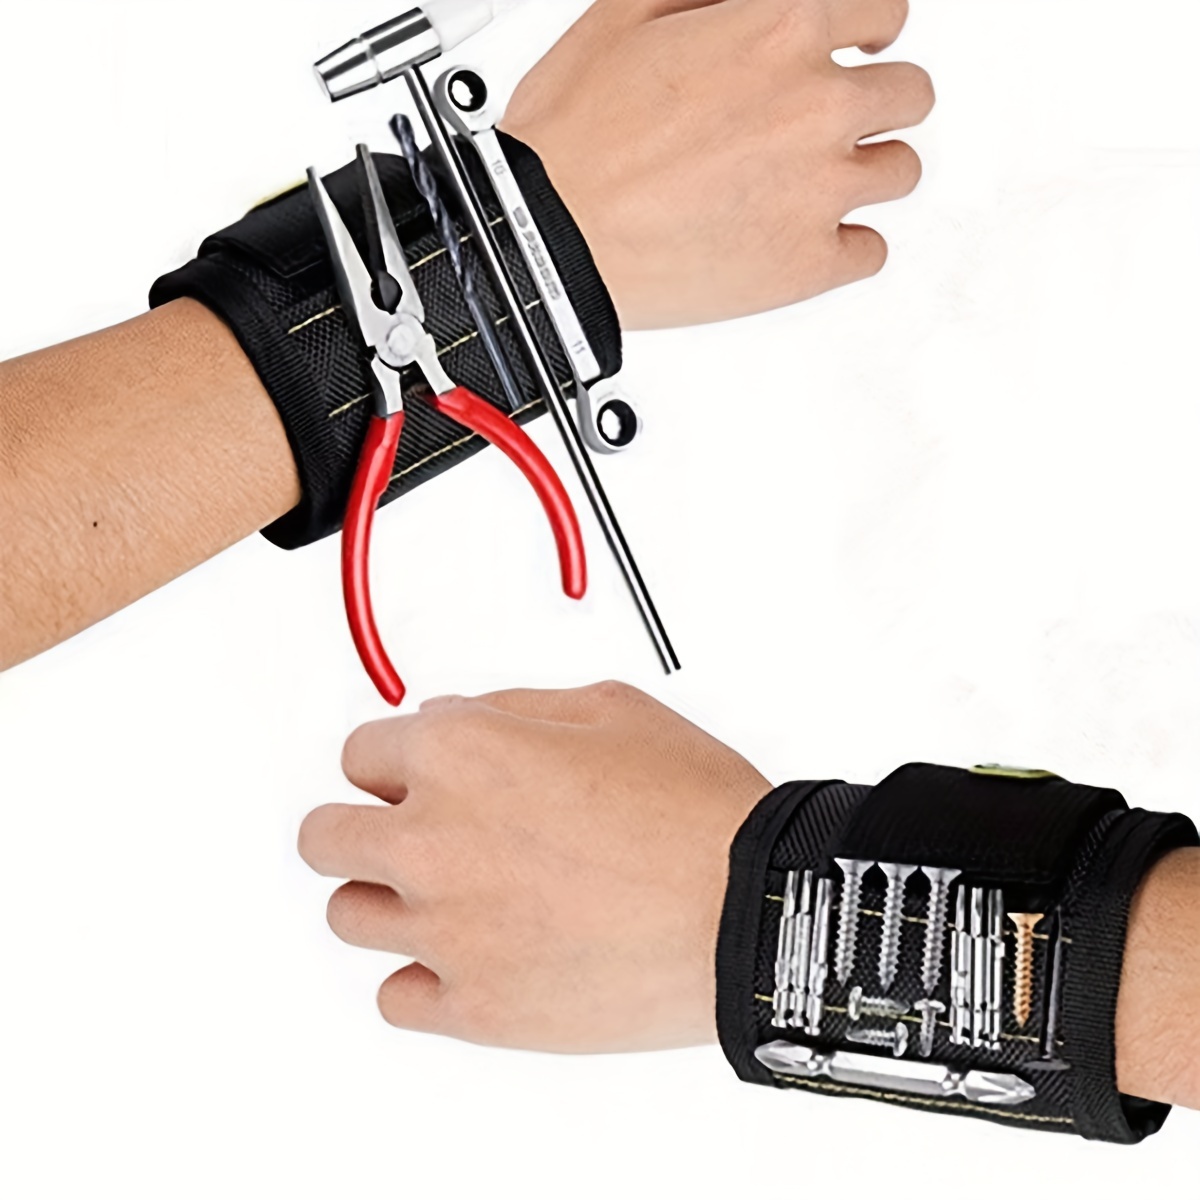 The Ultimate DIY Tool: Magnetic Wristband For Holding Screws, Nails,  Drilling Bits - Perfect Gift For Handymen, Men, Women, And Dad!